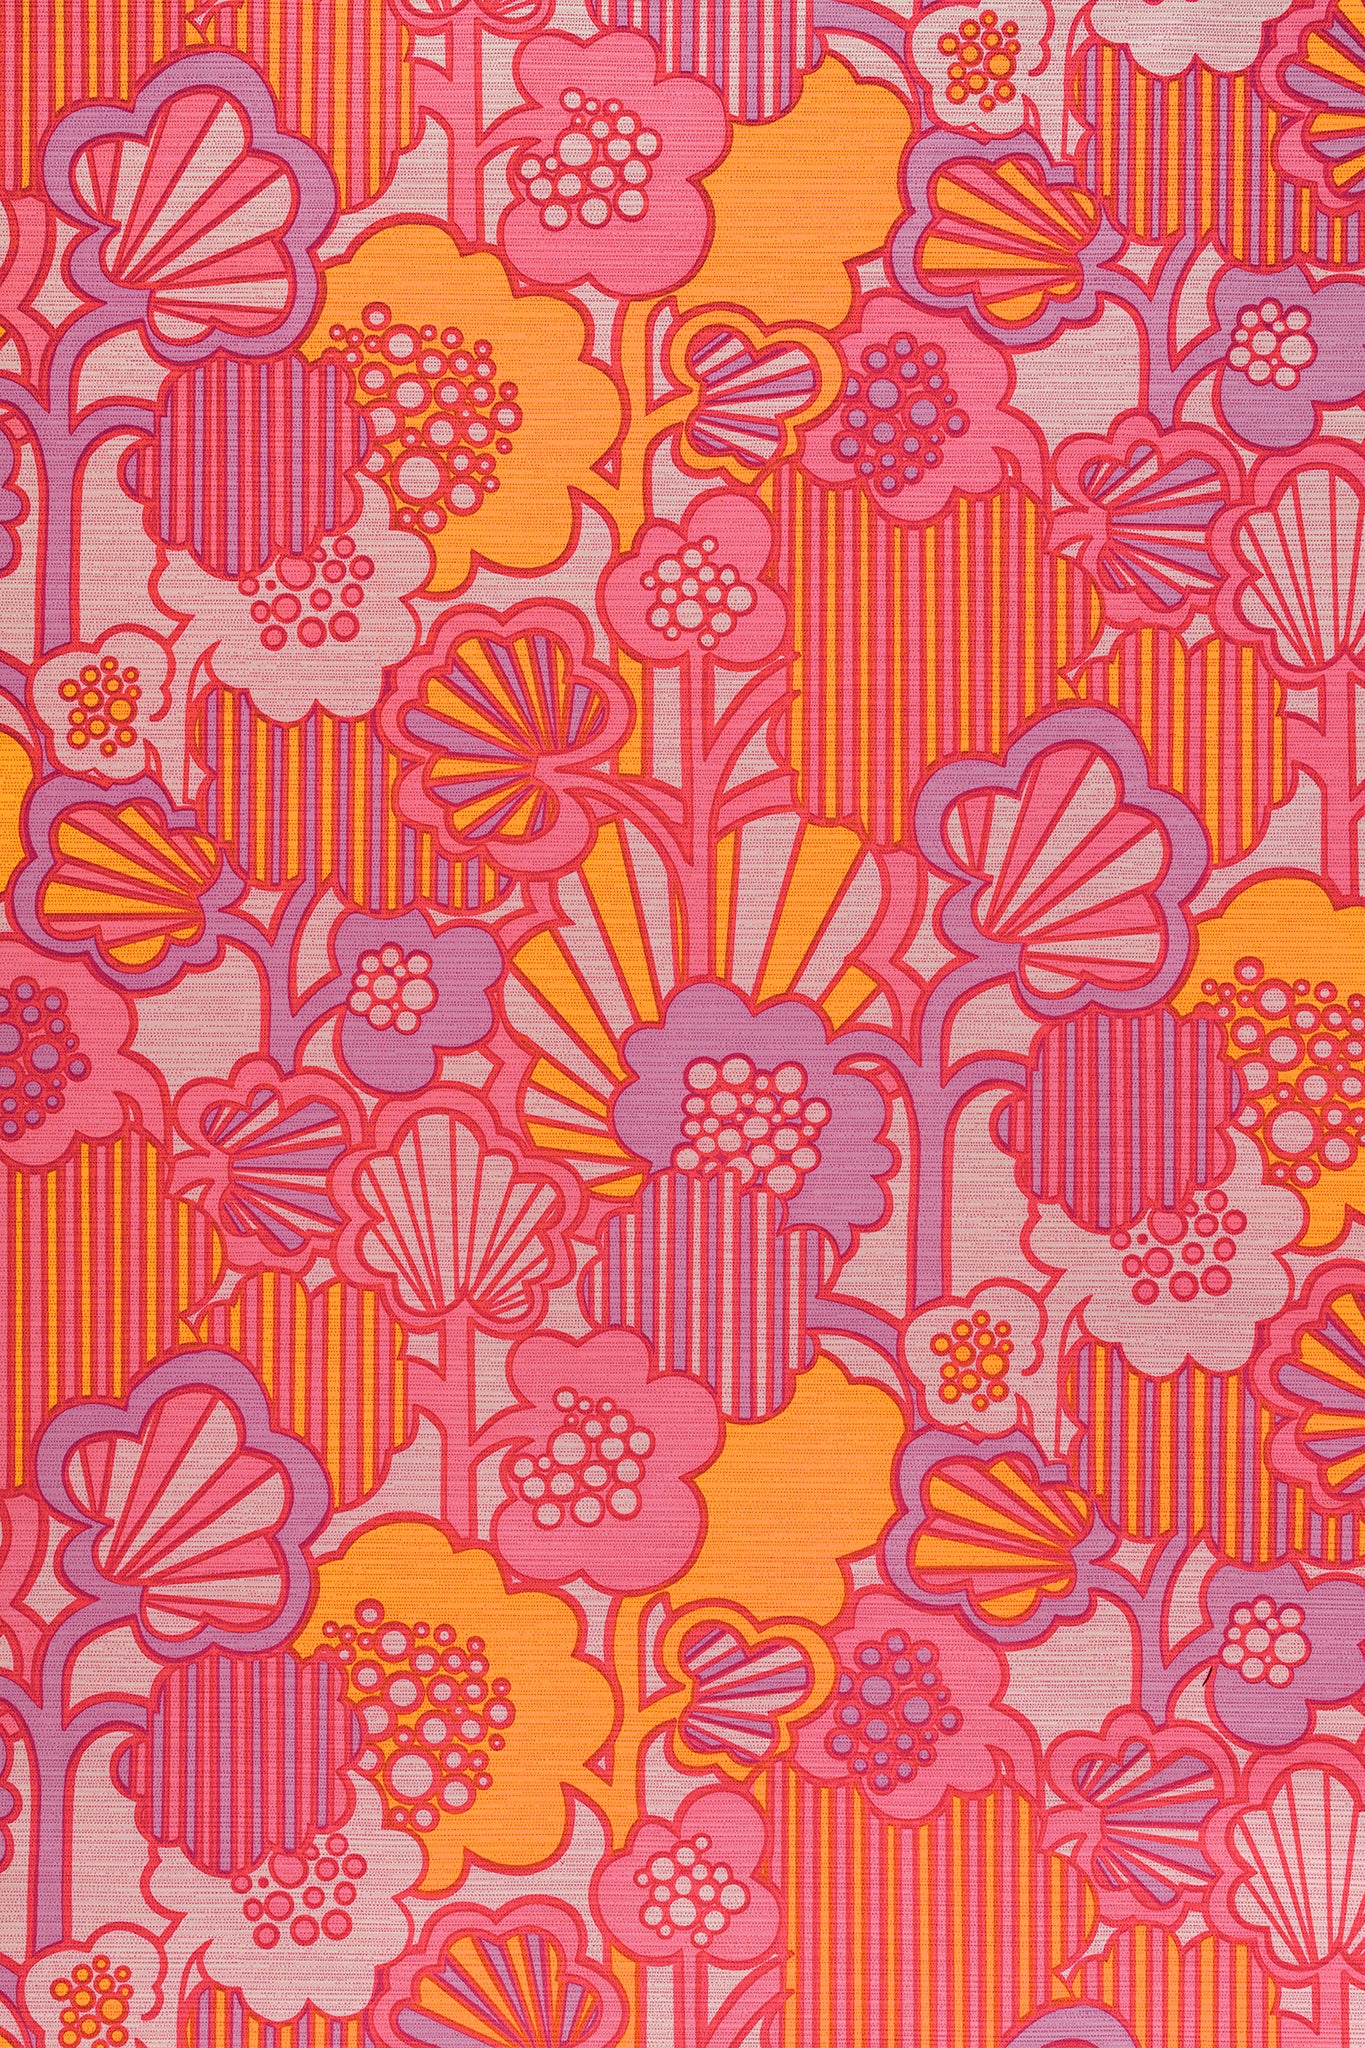 Pink and Orange A1 Photography Backdrop - Retro Wallpaper